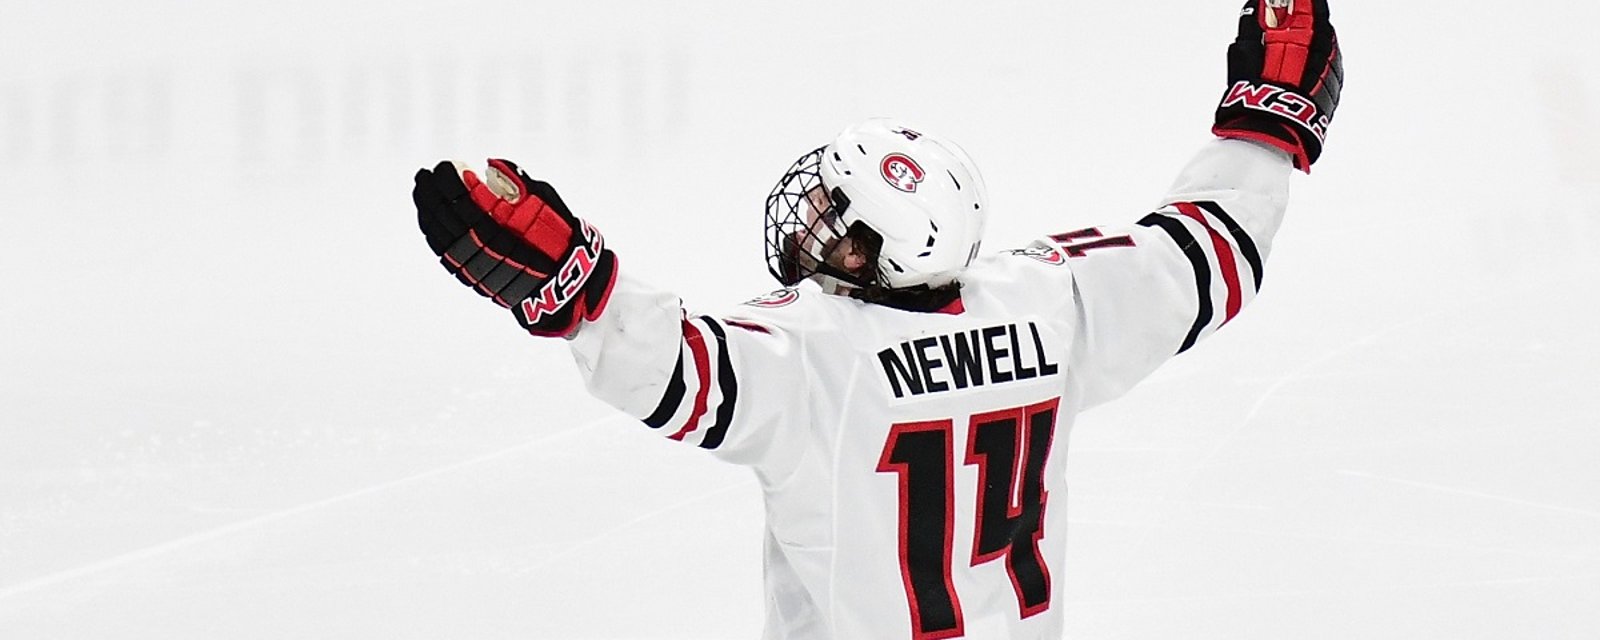 Breaking: Free agent college star Patrick Newell close to signing with NHL team.